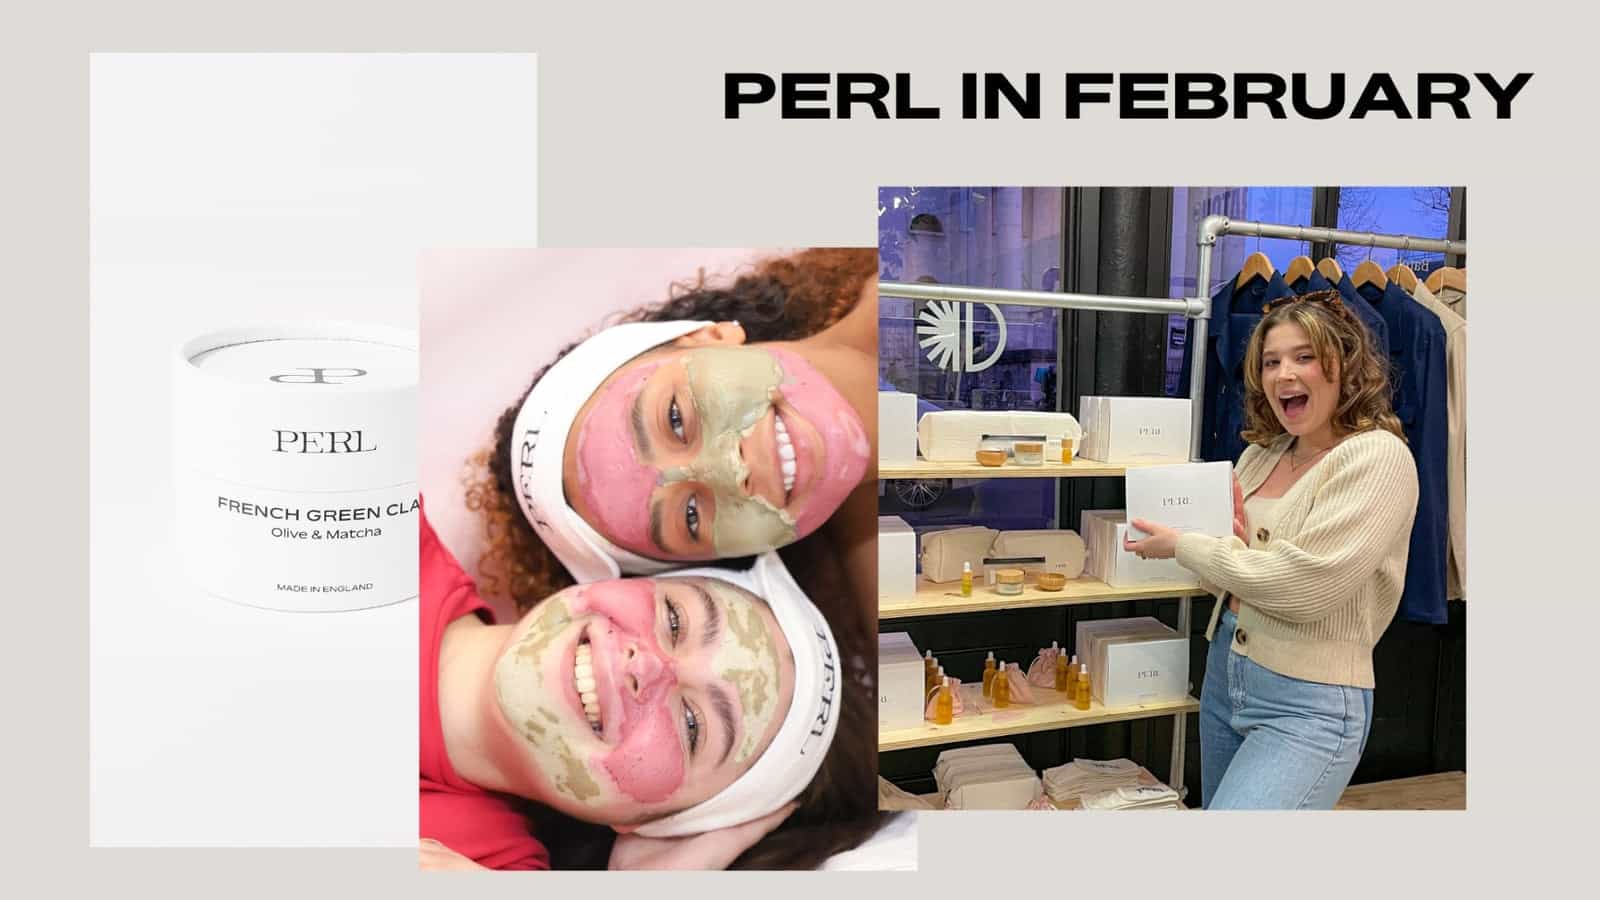 What happened at PERL in February? - PERL Cosmetics